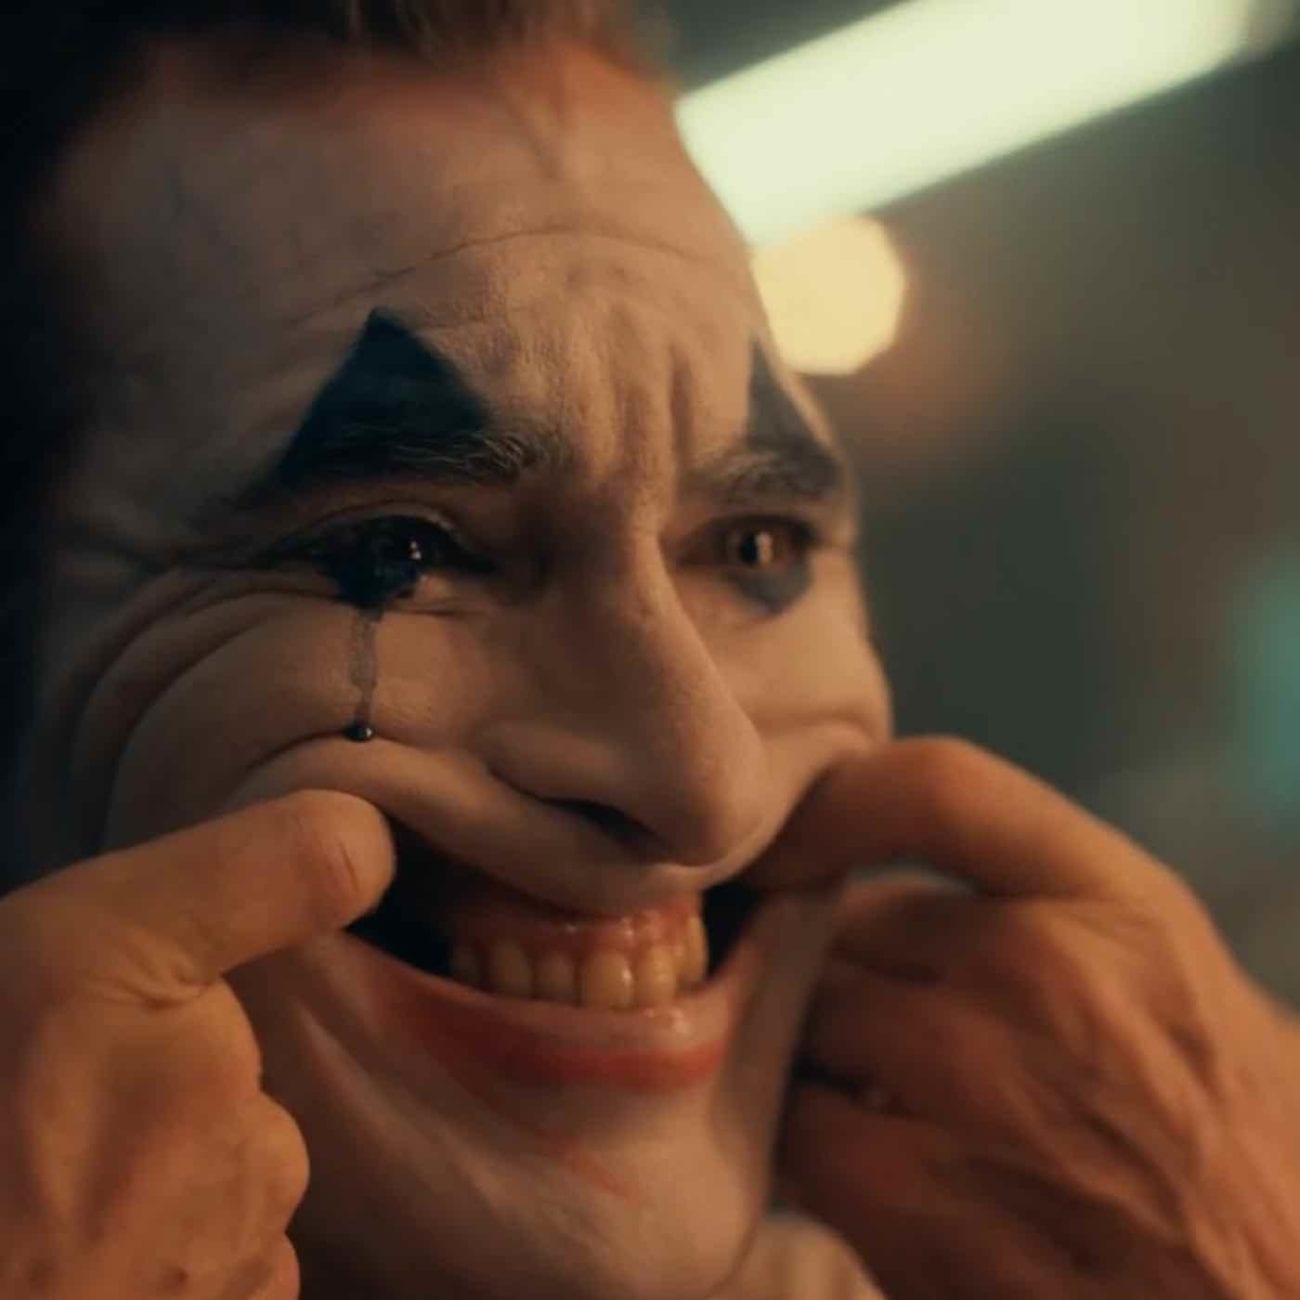 From 'Batman v Superman: Dawn of Justice' to 'Joker', we must see DC's trailers to adjudicate quality. But DC's films' history is spotty.